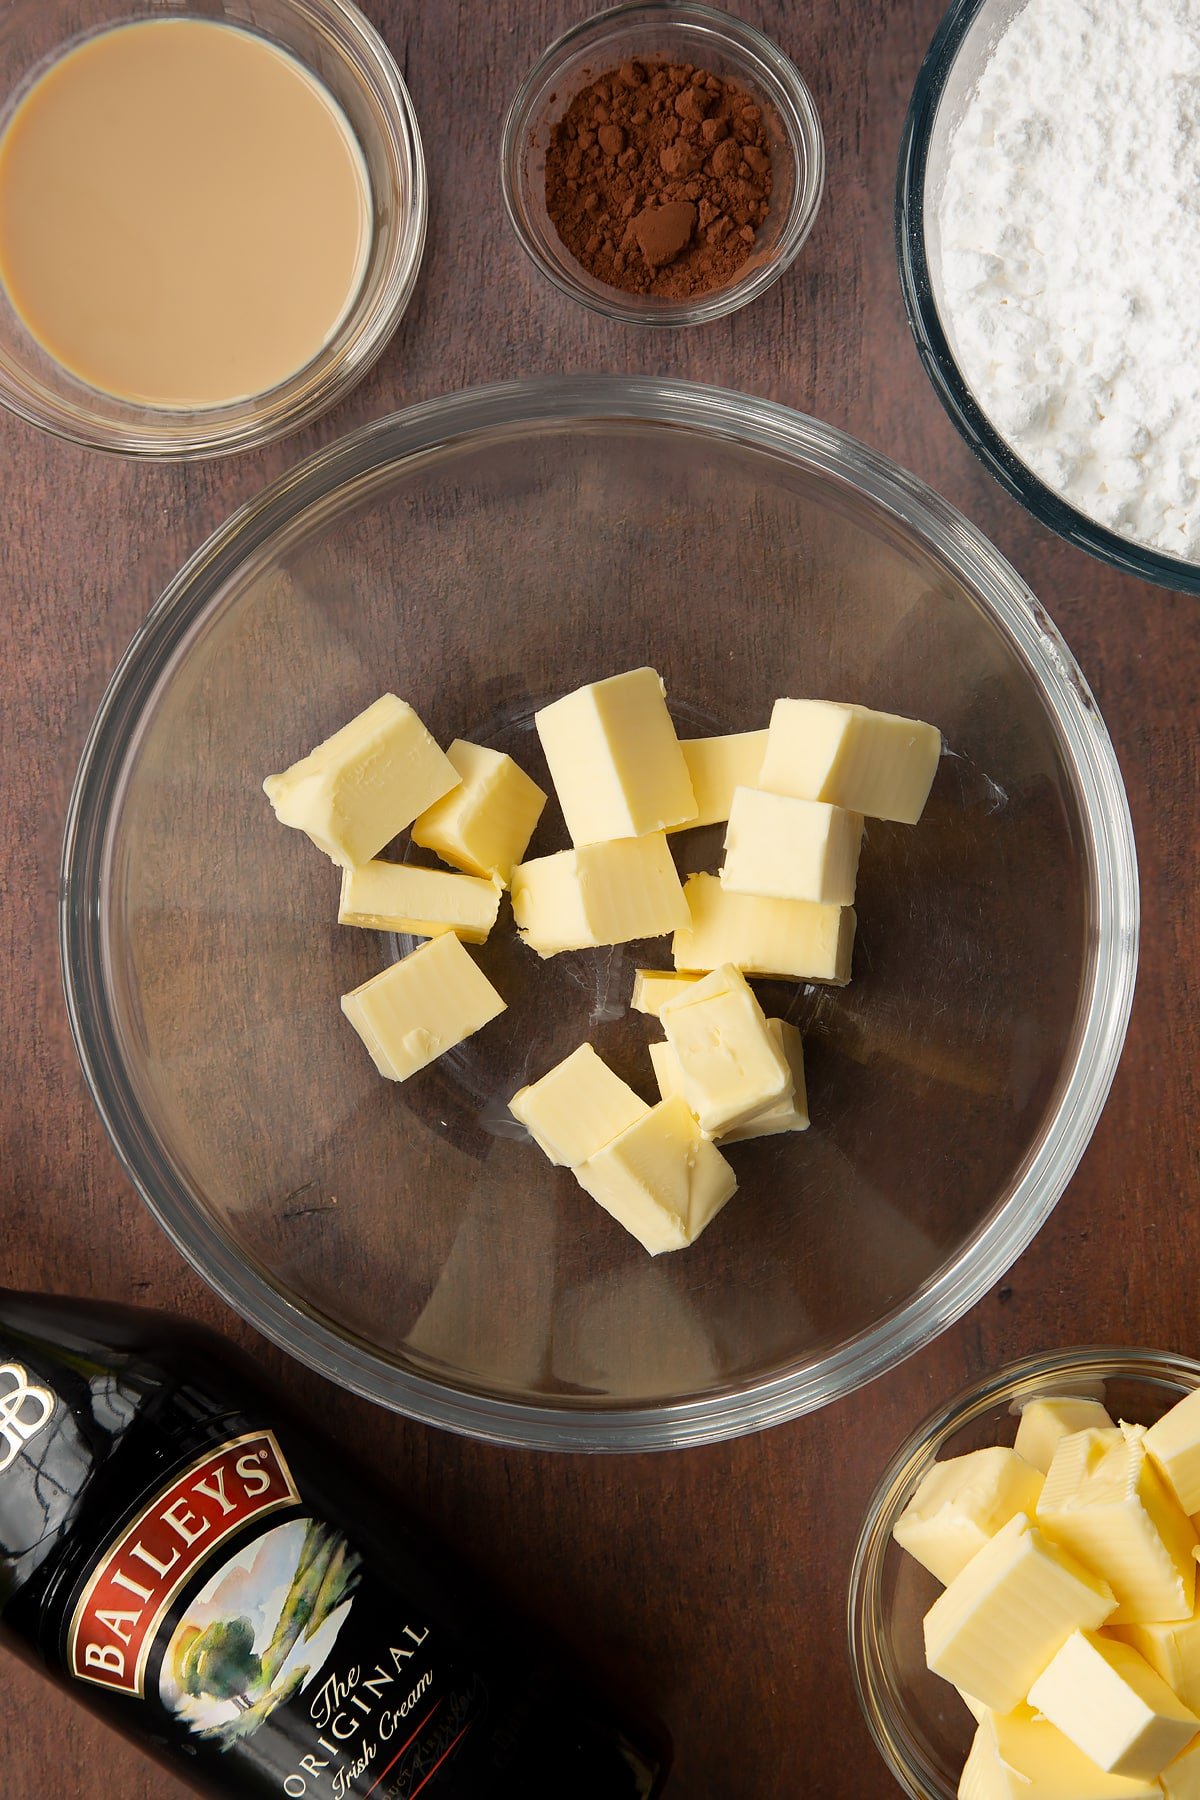 Cubed butter in a glass bowl. Ingredients to make Baileys icing surround the bowl.